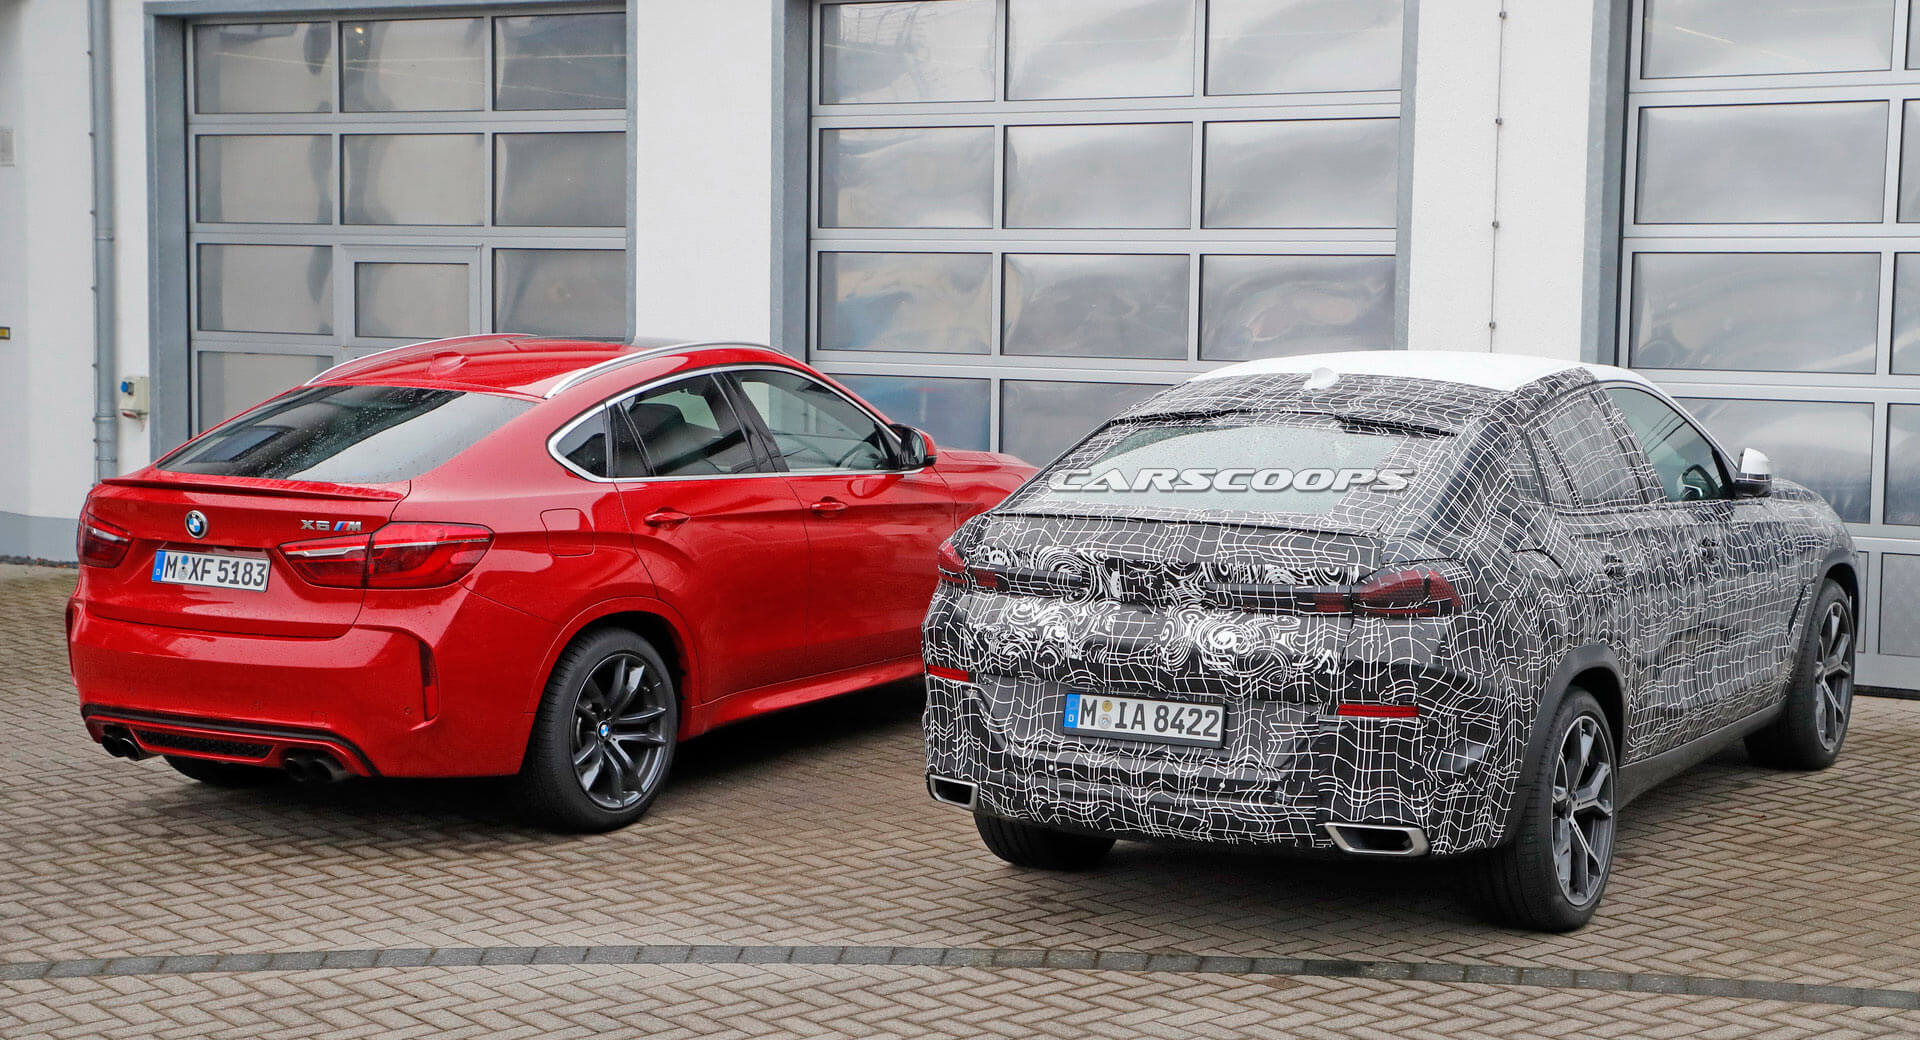 BMW X6 Poses Next To X6 M For Good Measure | Carscoops